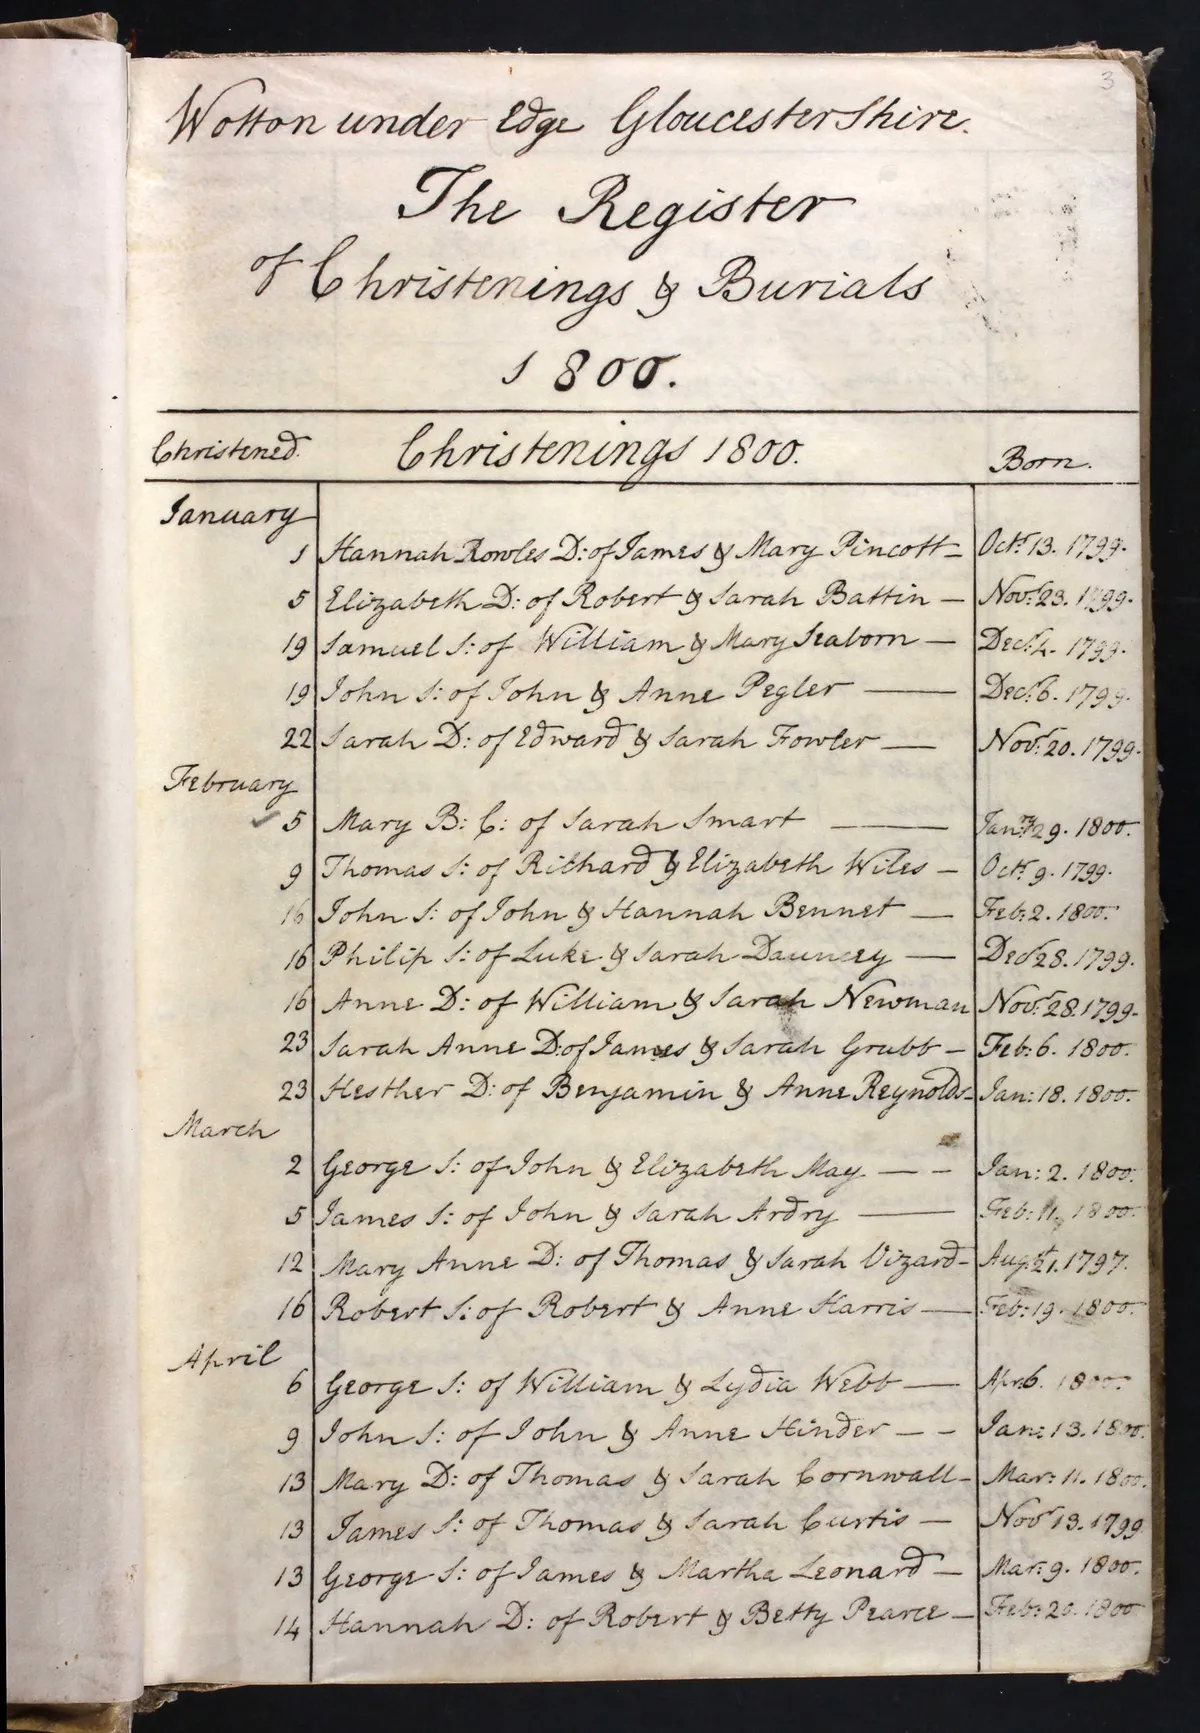 Parish register from 1800 on aged paper